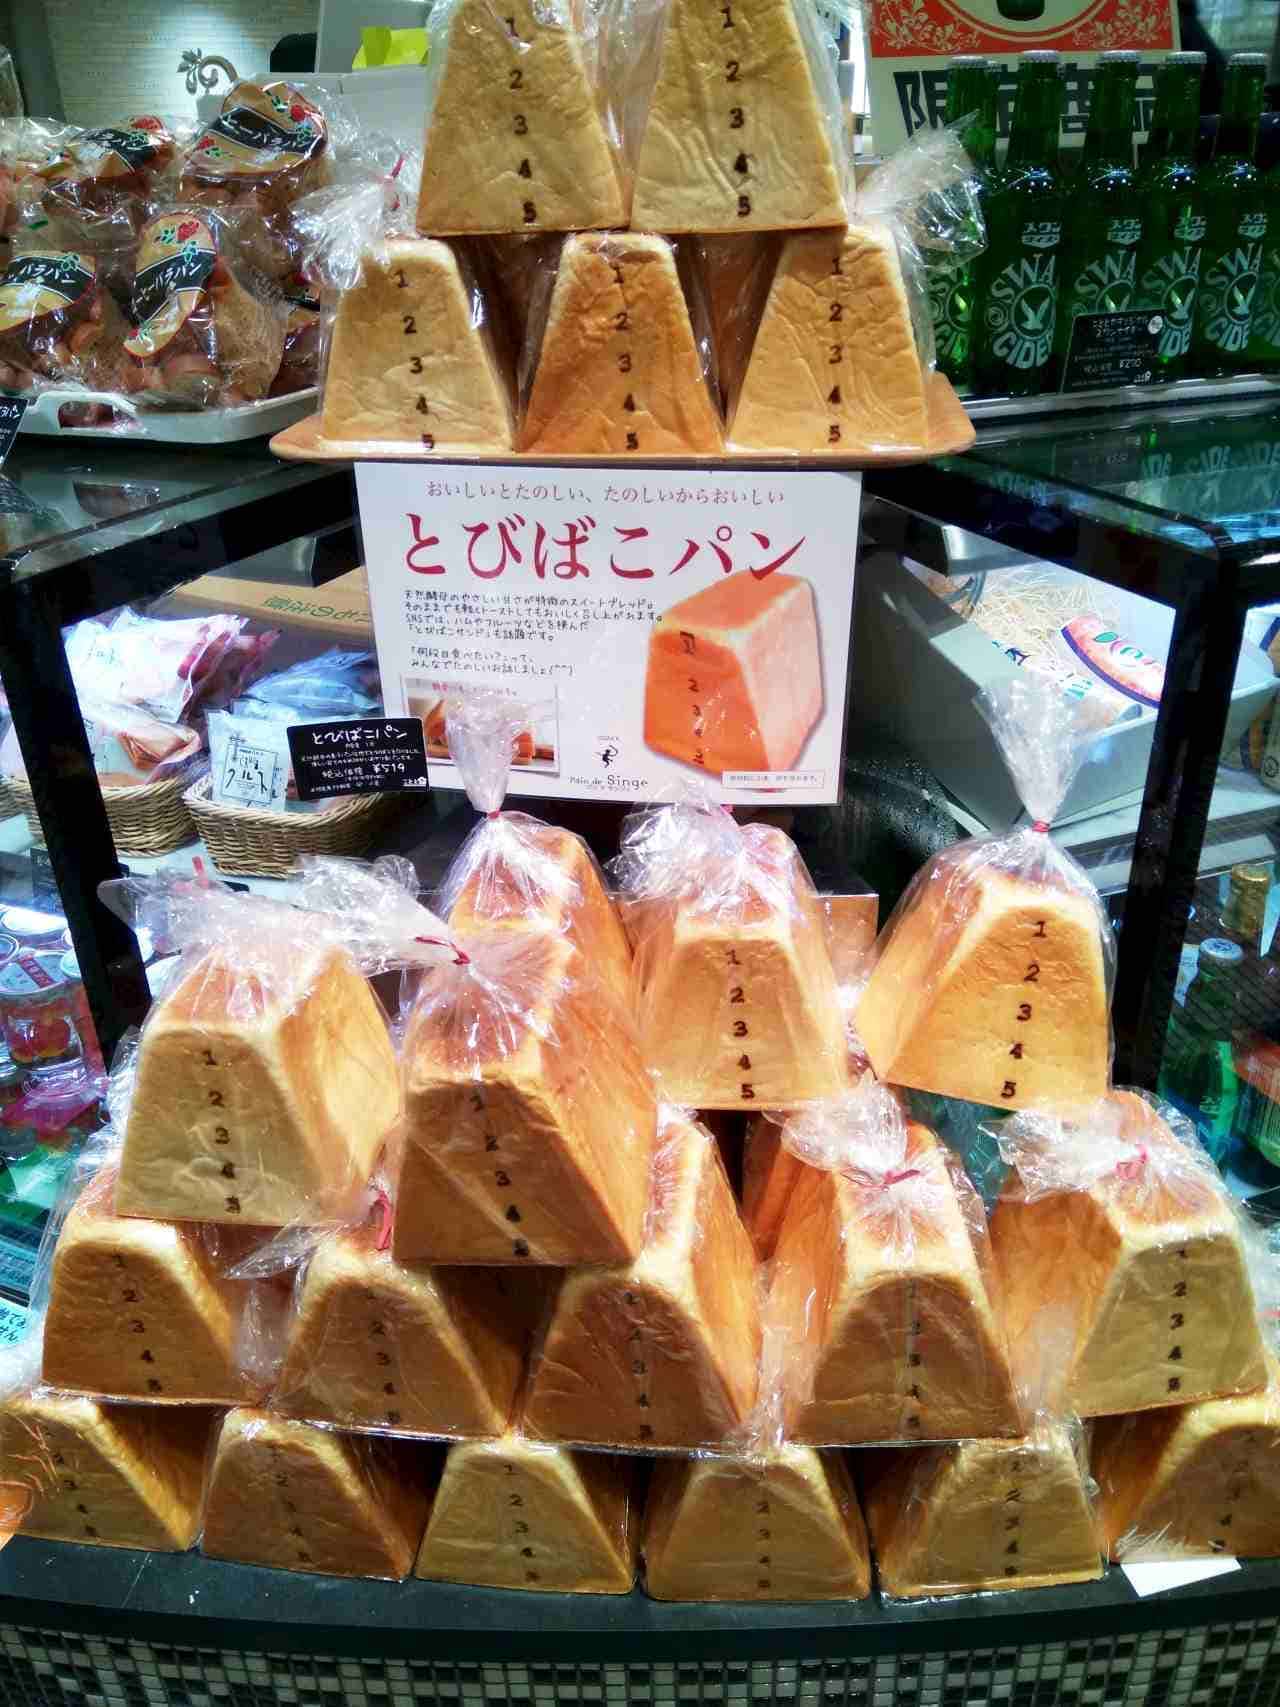 Which stage do you eat? That "Tobibako Bread" is on sale at Shibuya Hikarie